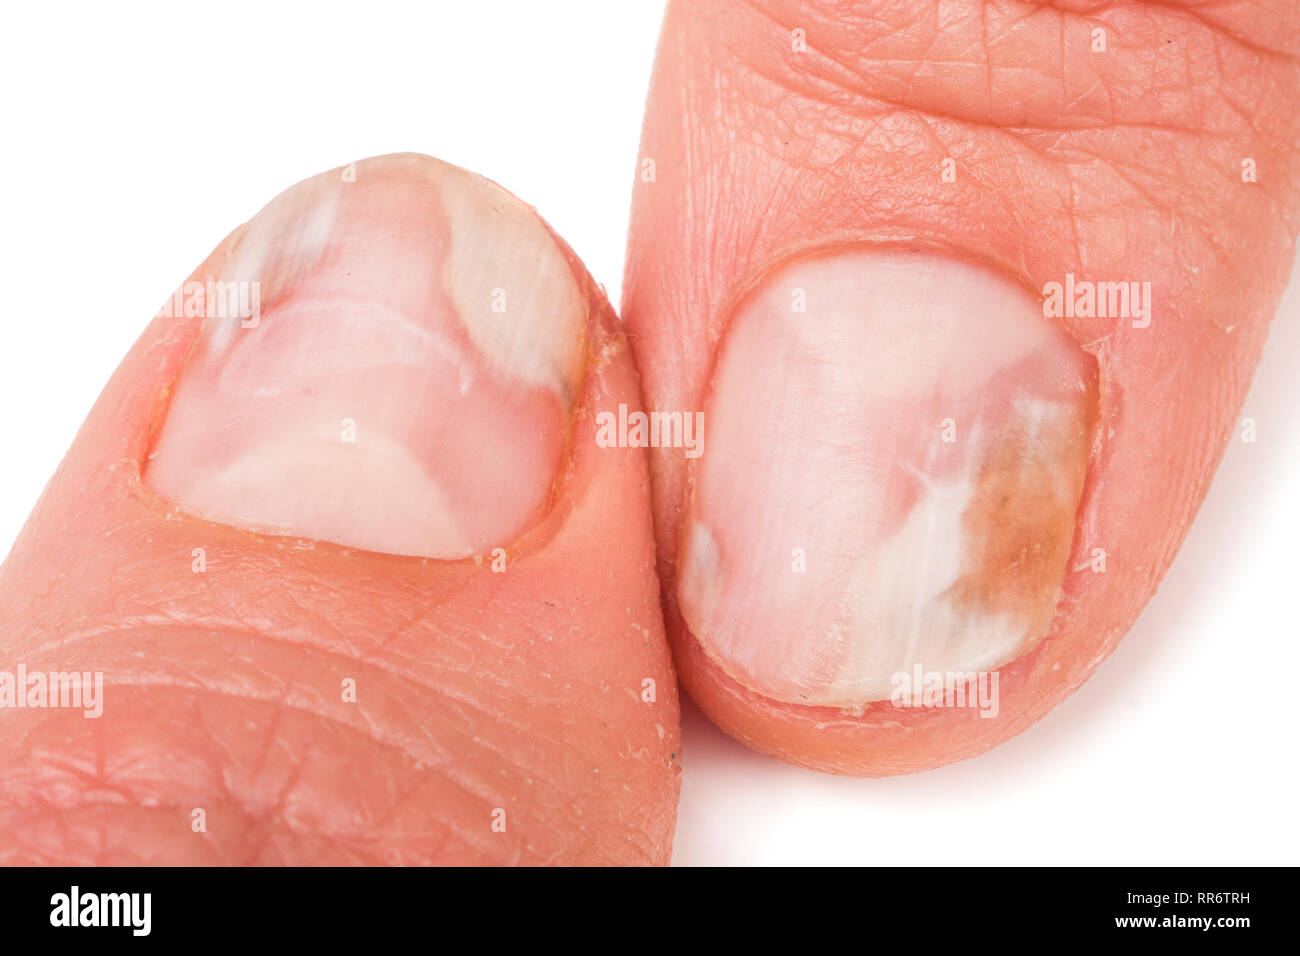 two fingers of the hand with a fungus on the nails isolated white background Stock Photo